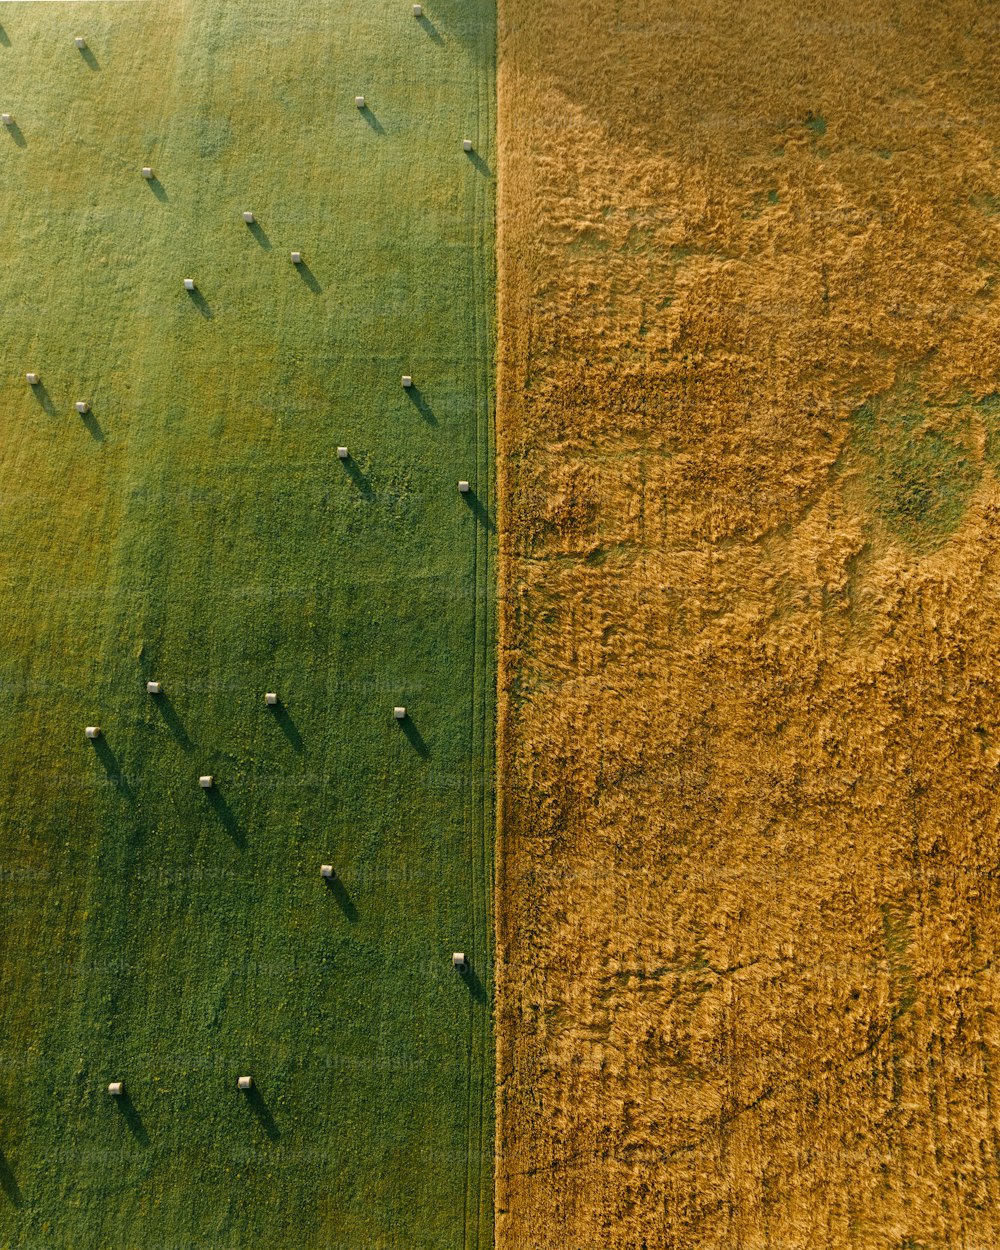 an aerial view of a green field and a yellow field